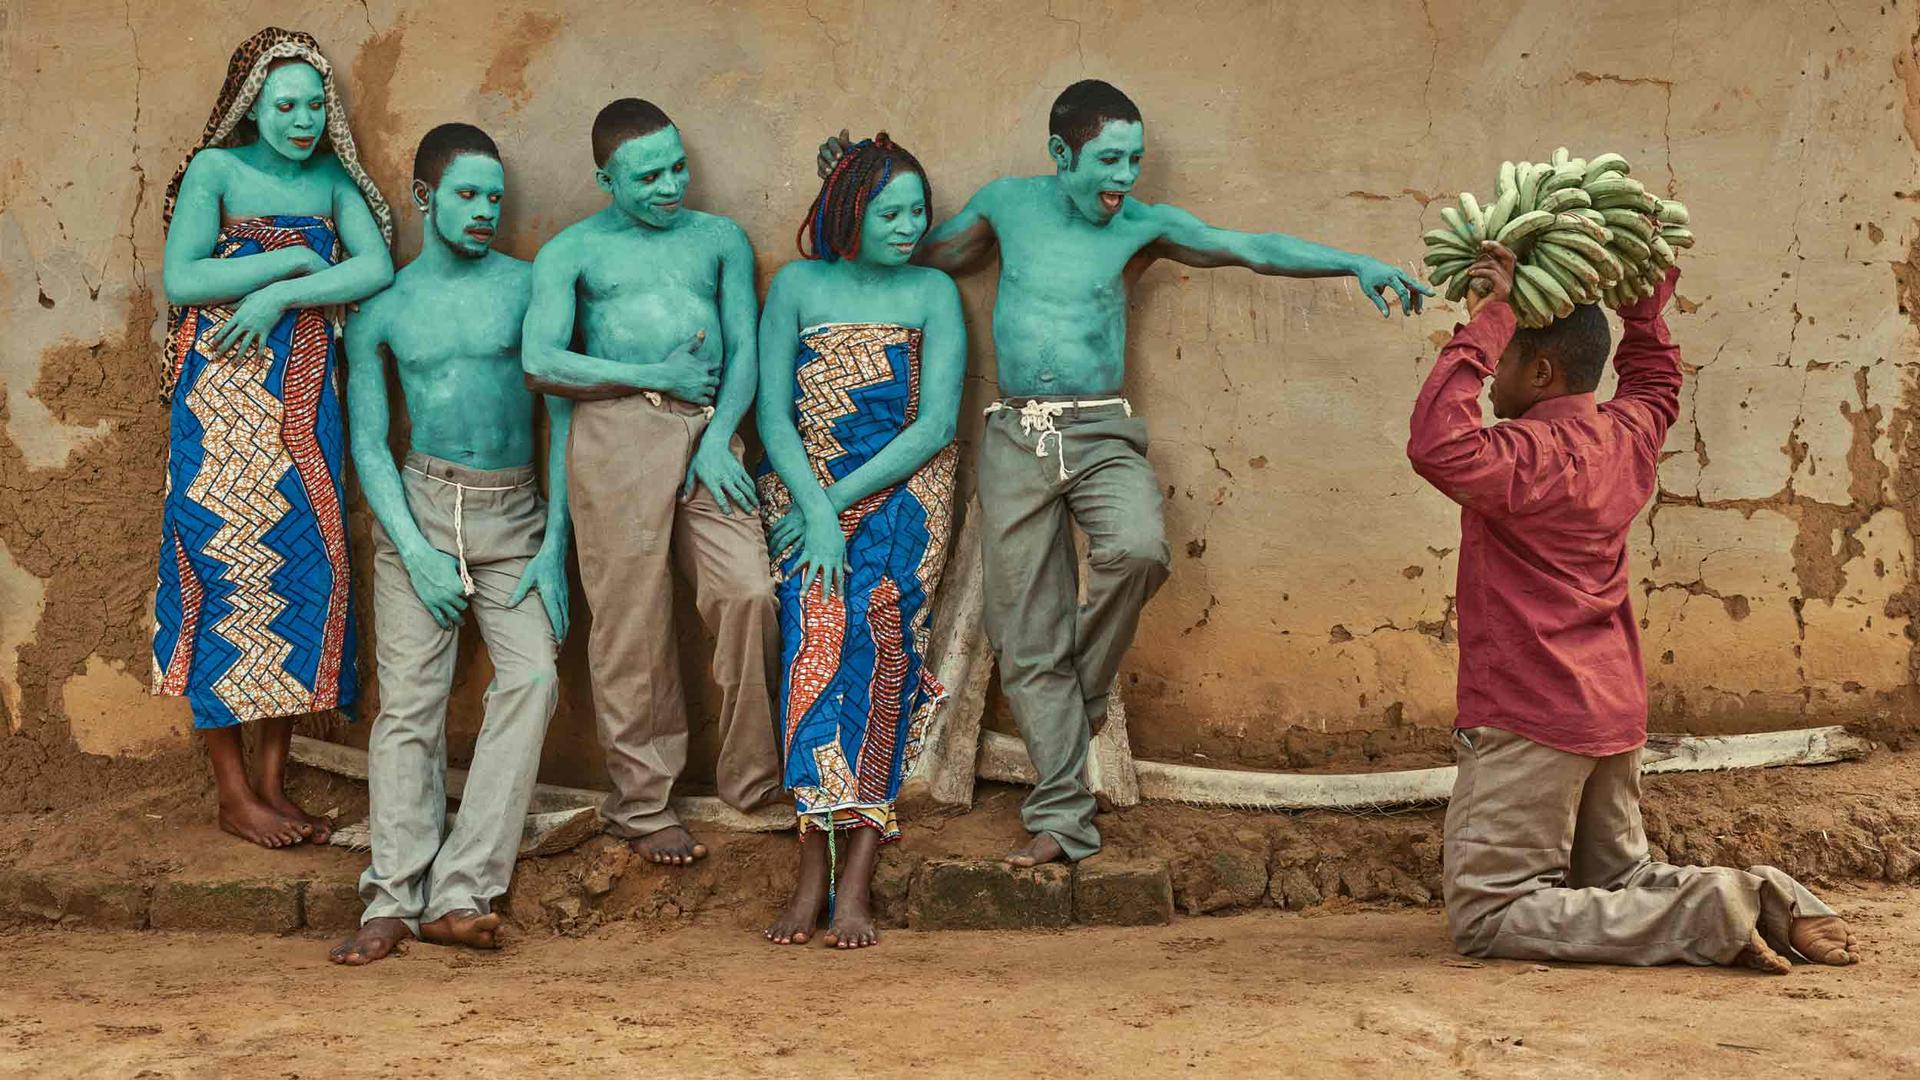 Five people are painted with a light green paint and post together. Another man is on his knees with bananas. 